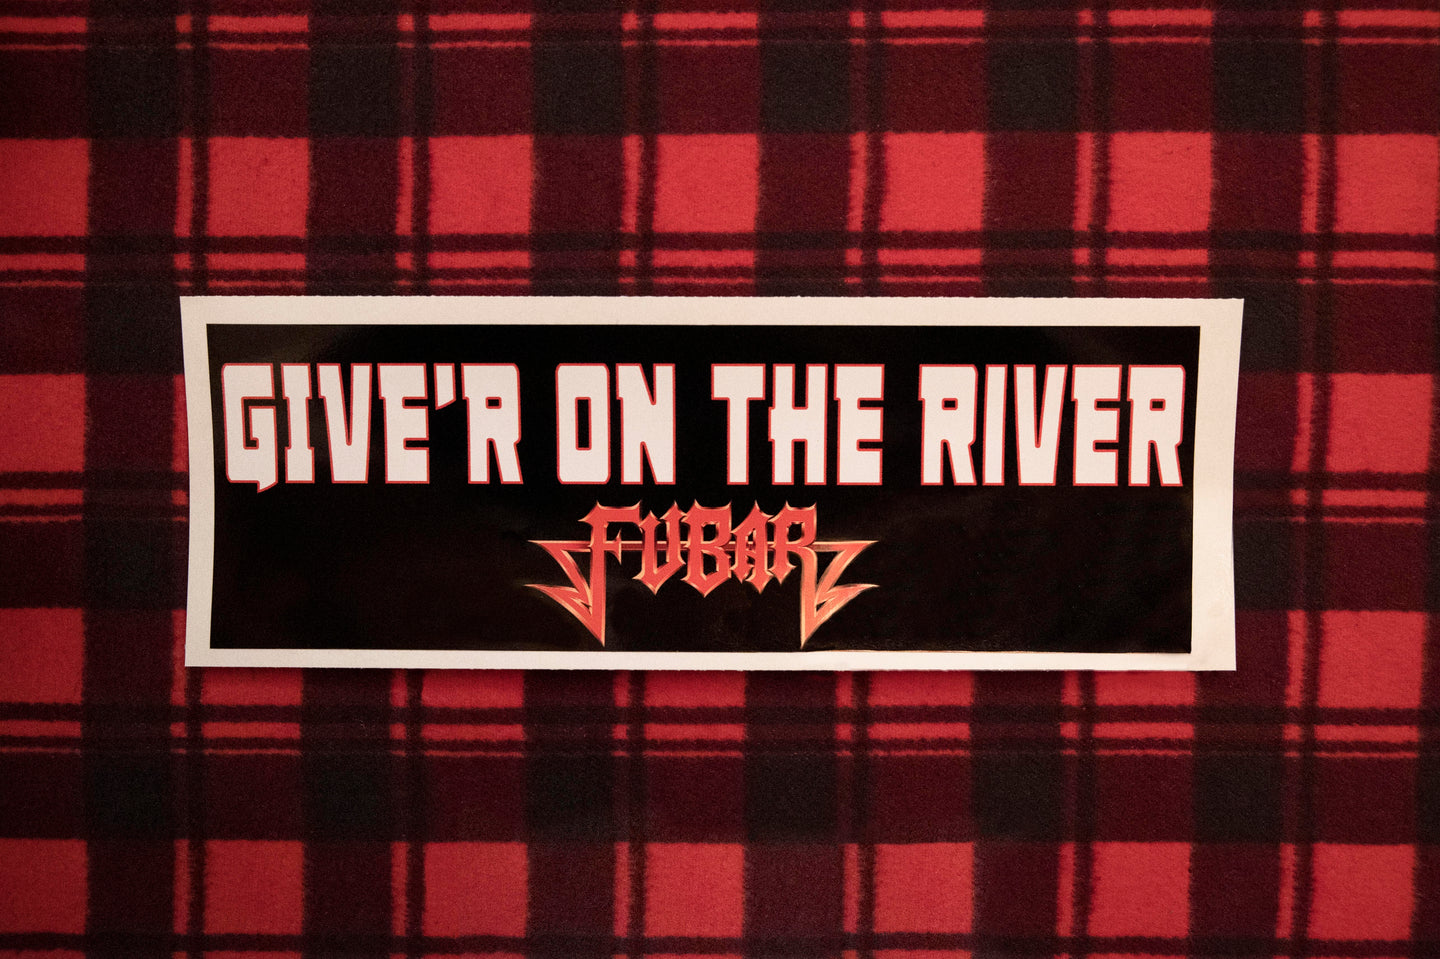 FUBAR - Give'r on the River - Bumper Sticker 4 by 15 Inches